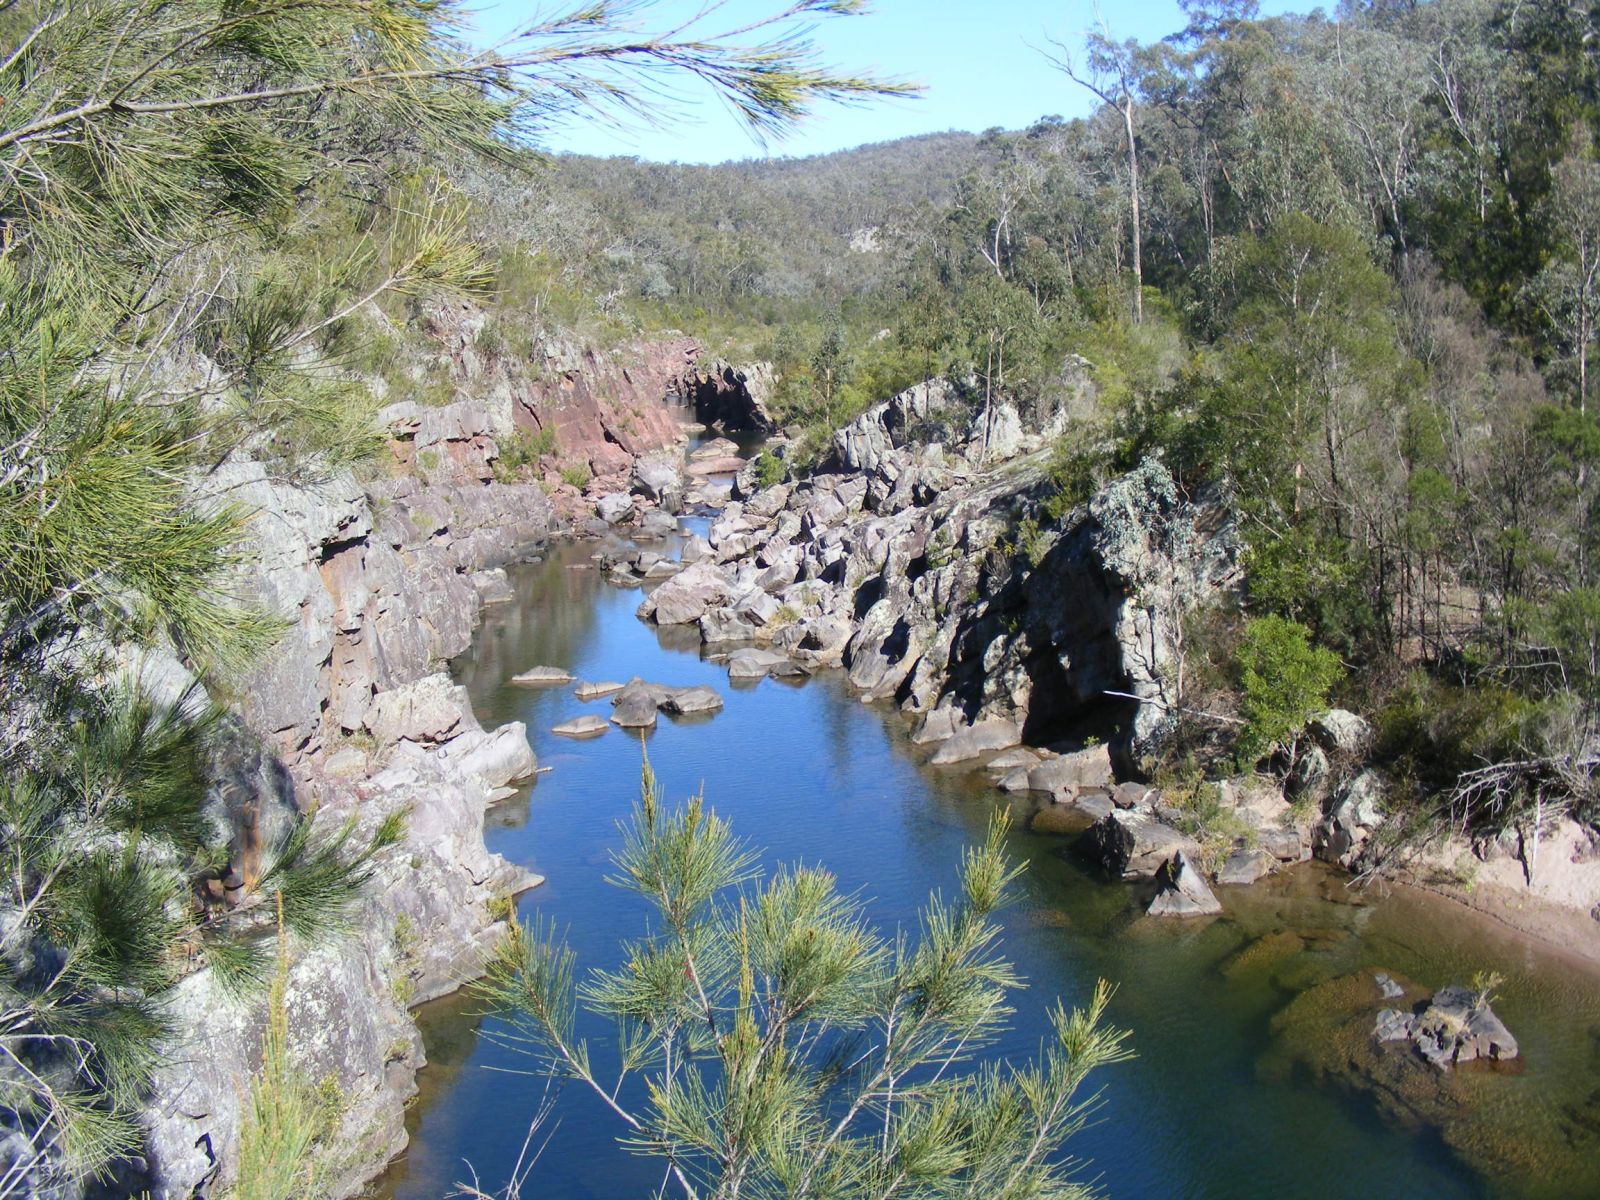 A view of the Channel Gorge with casuarina trees on either side